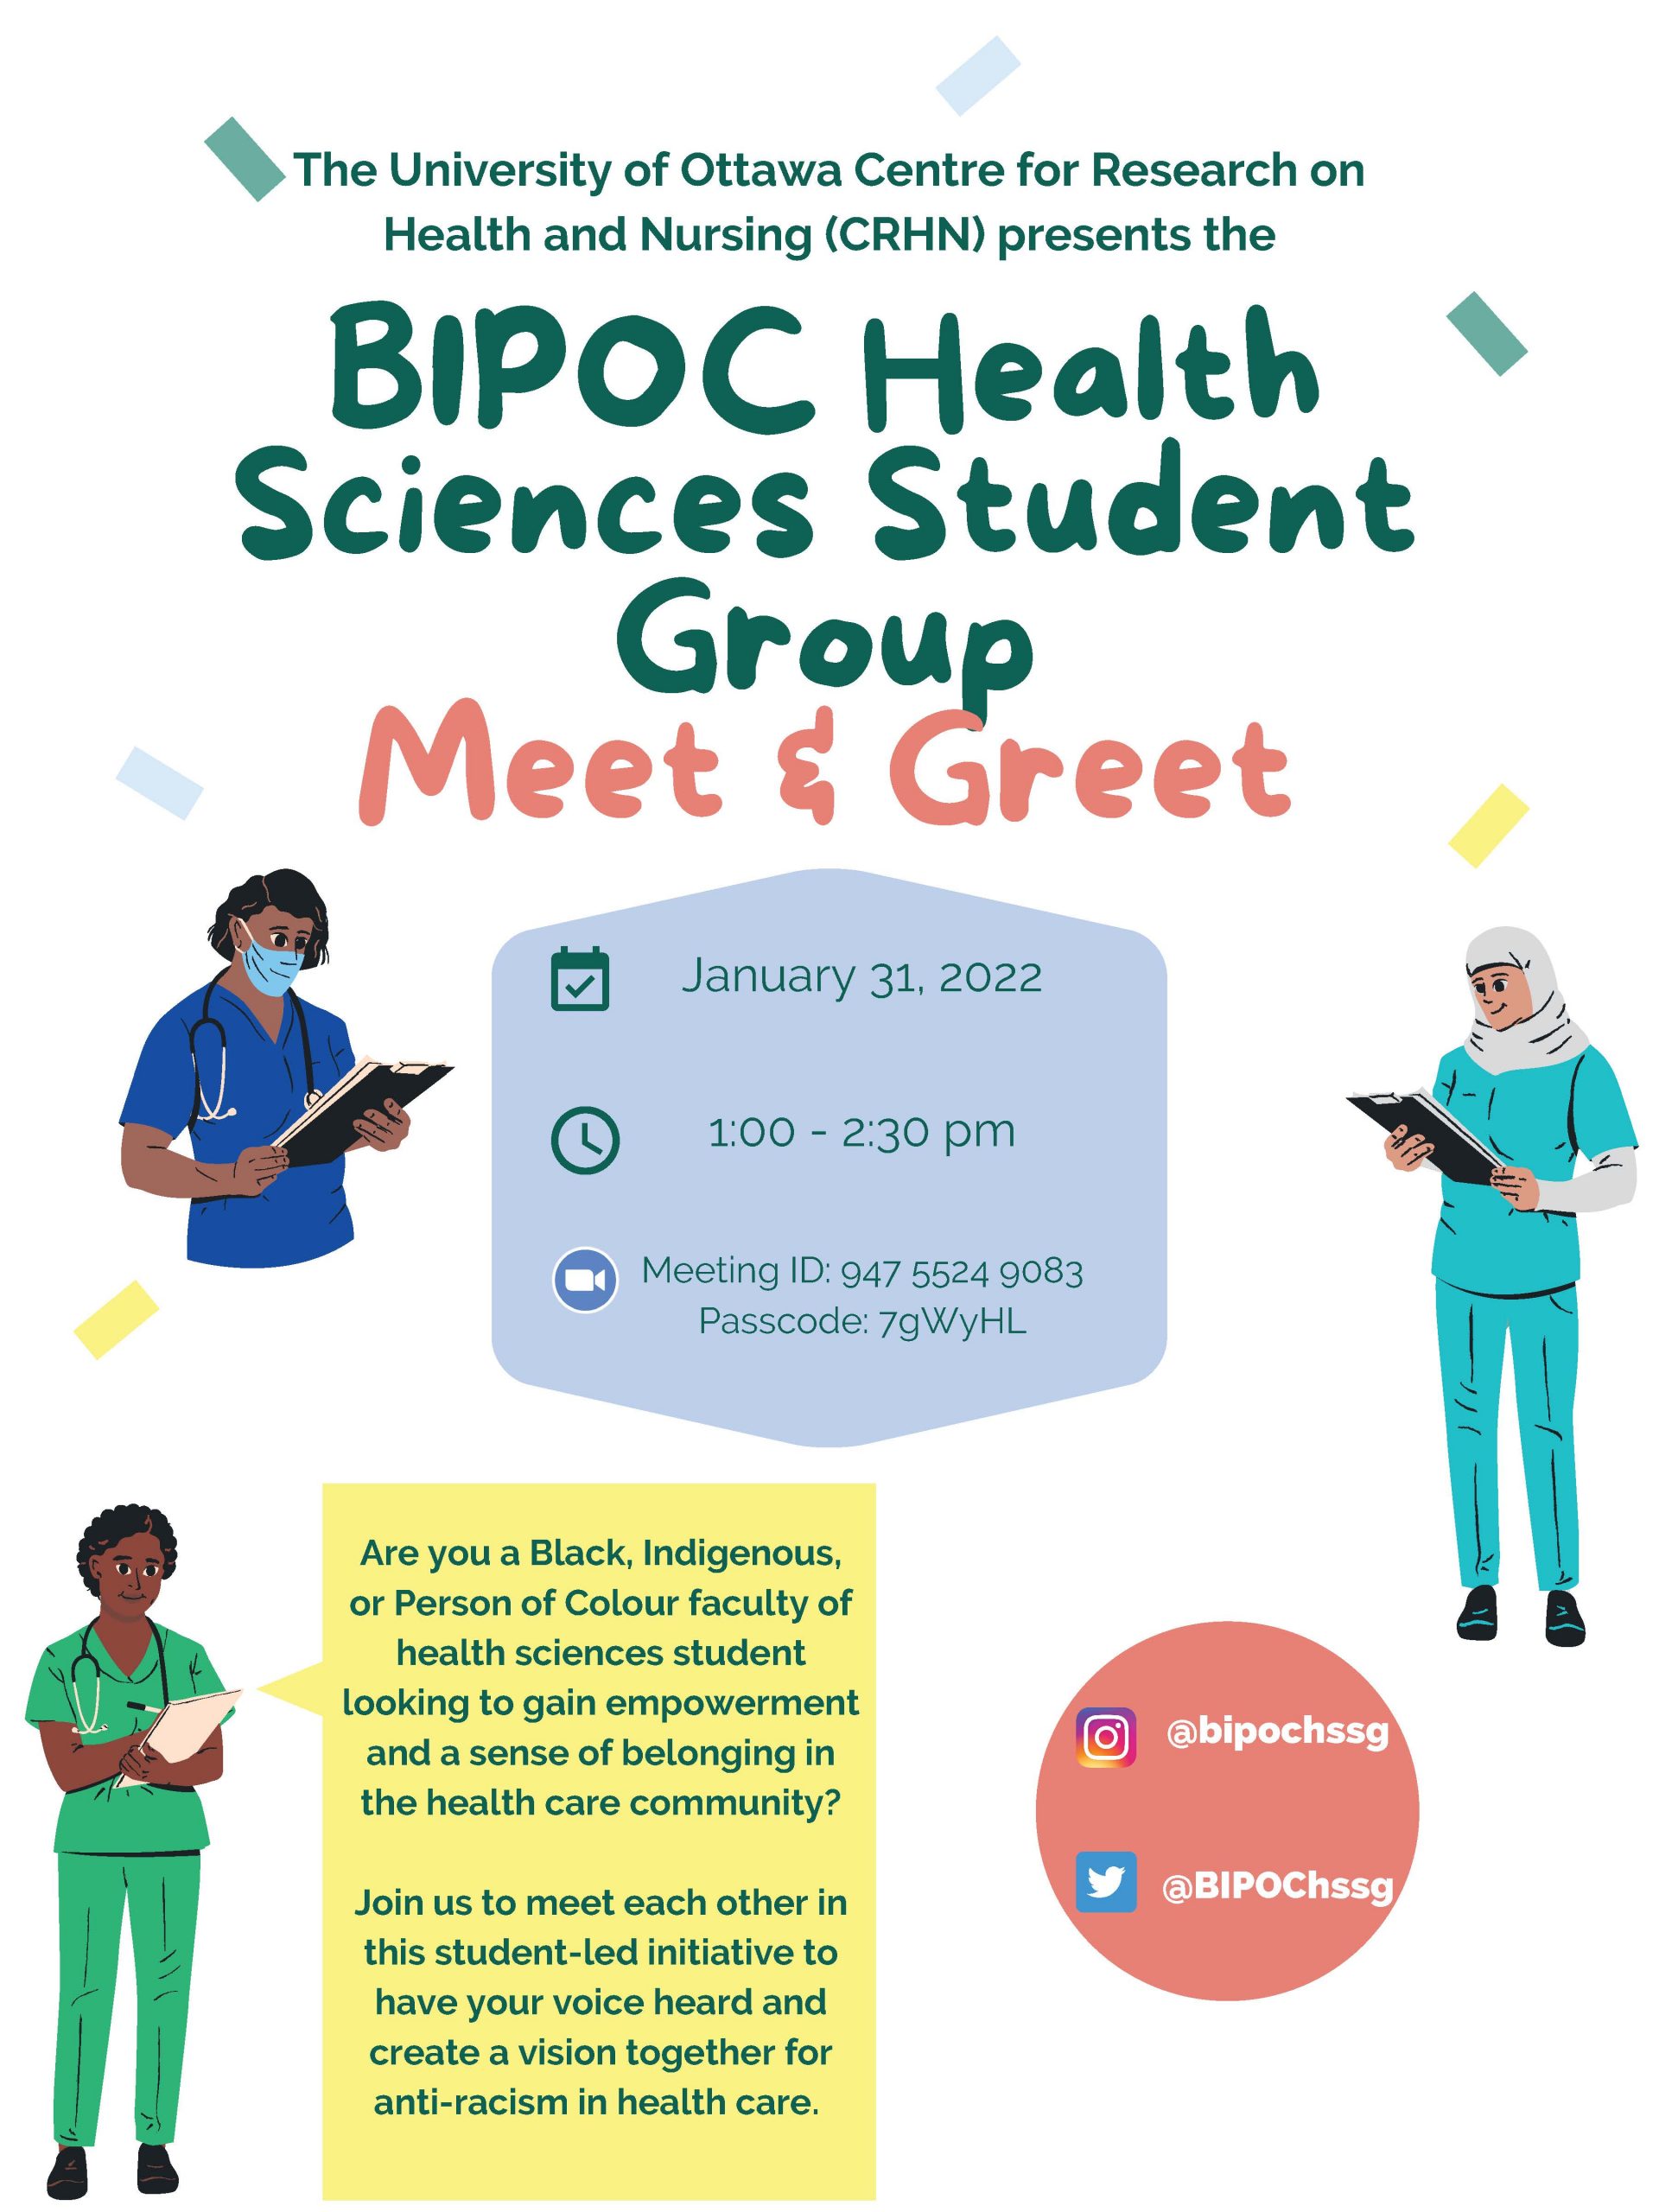 BIPOC Health Sciences Student Group – Meet and Greet